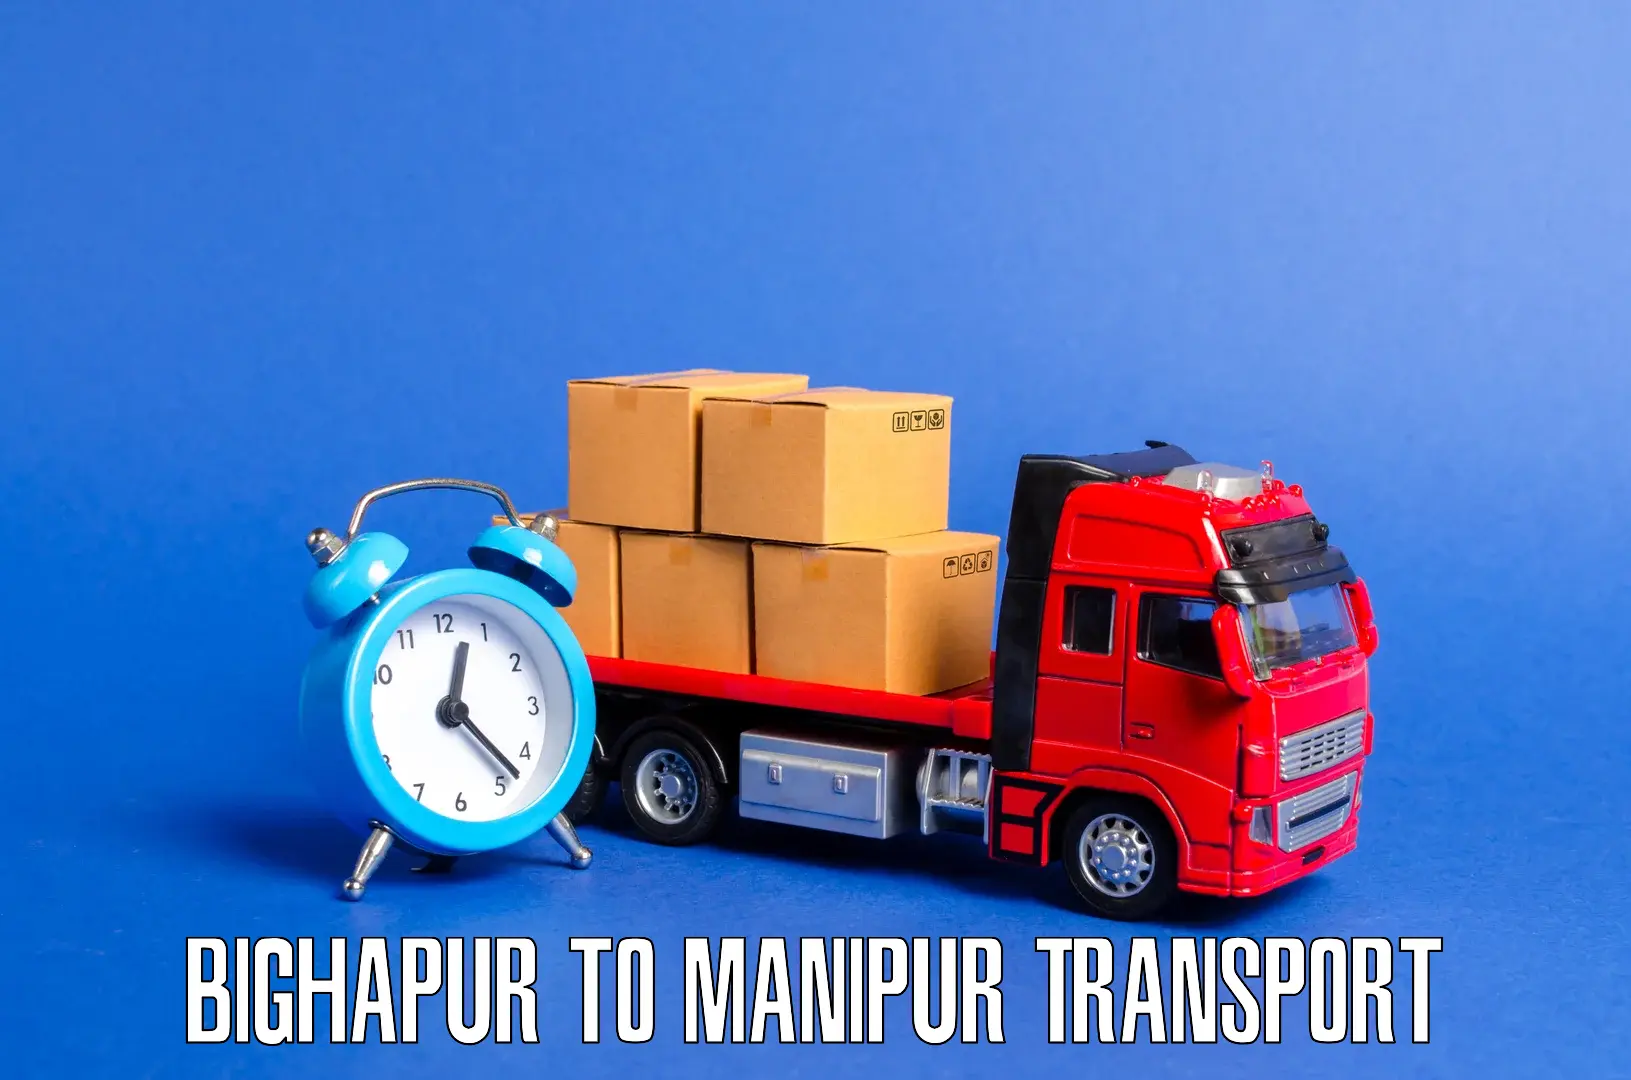 Daily transport service Bighapur to Manipur